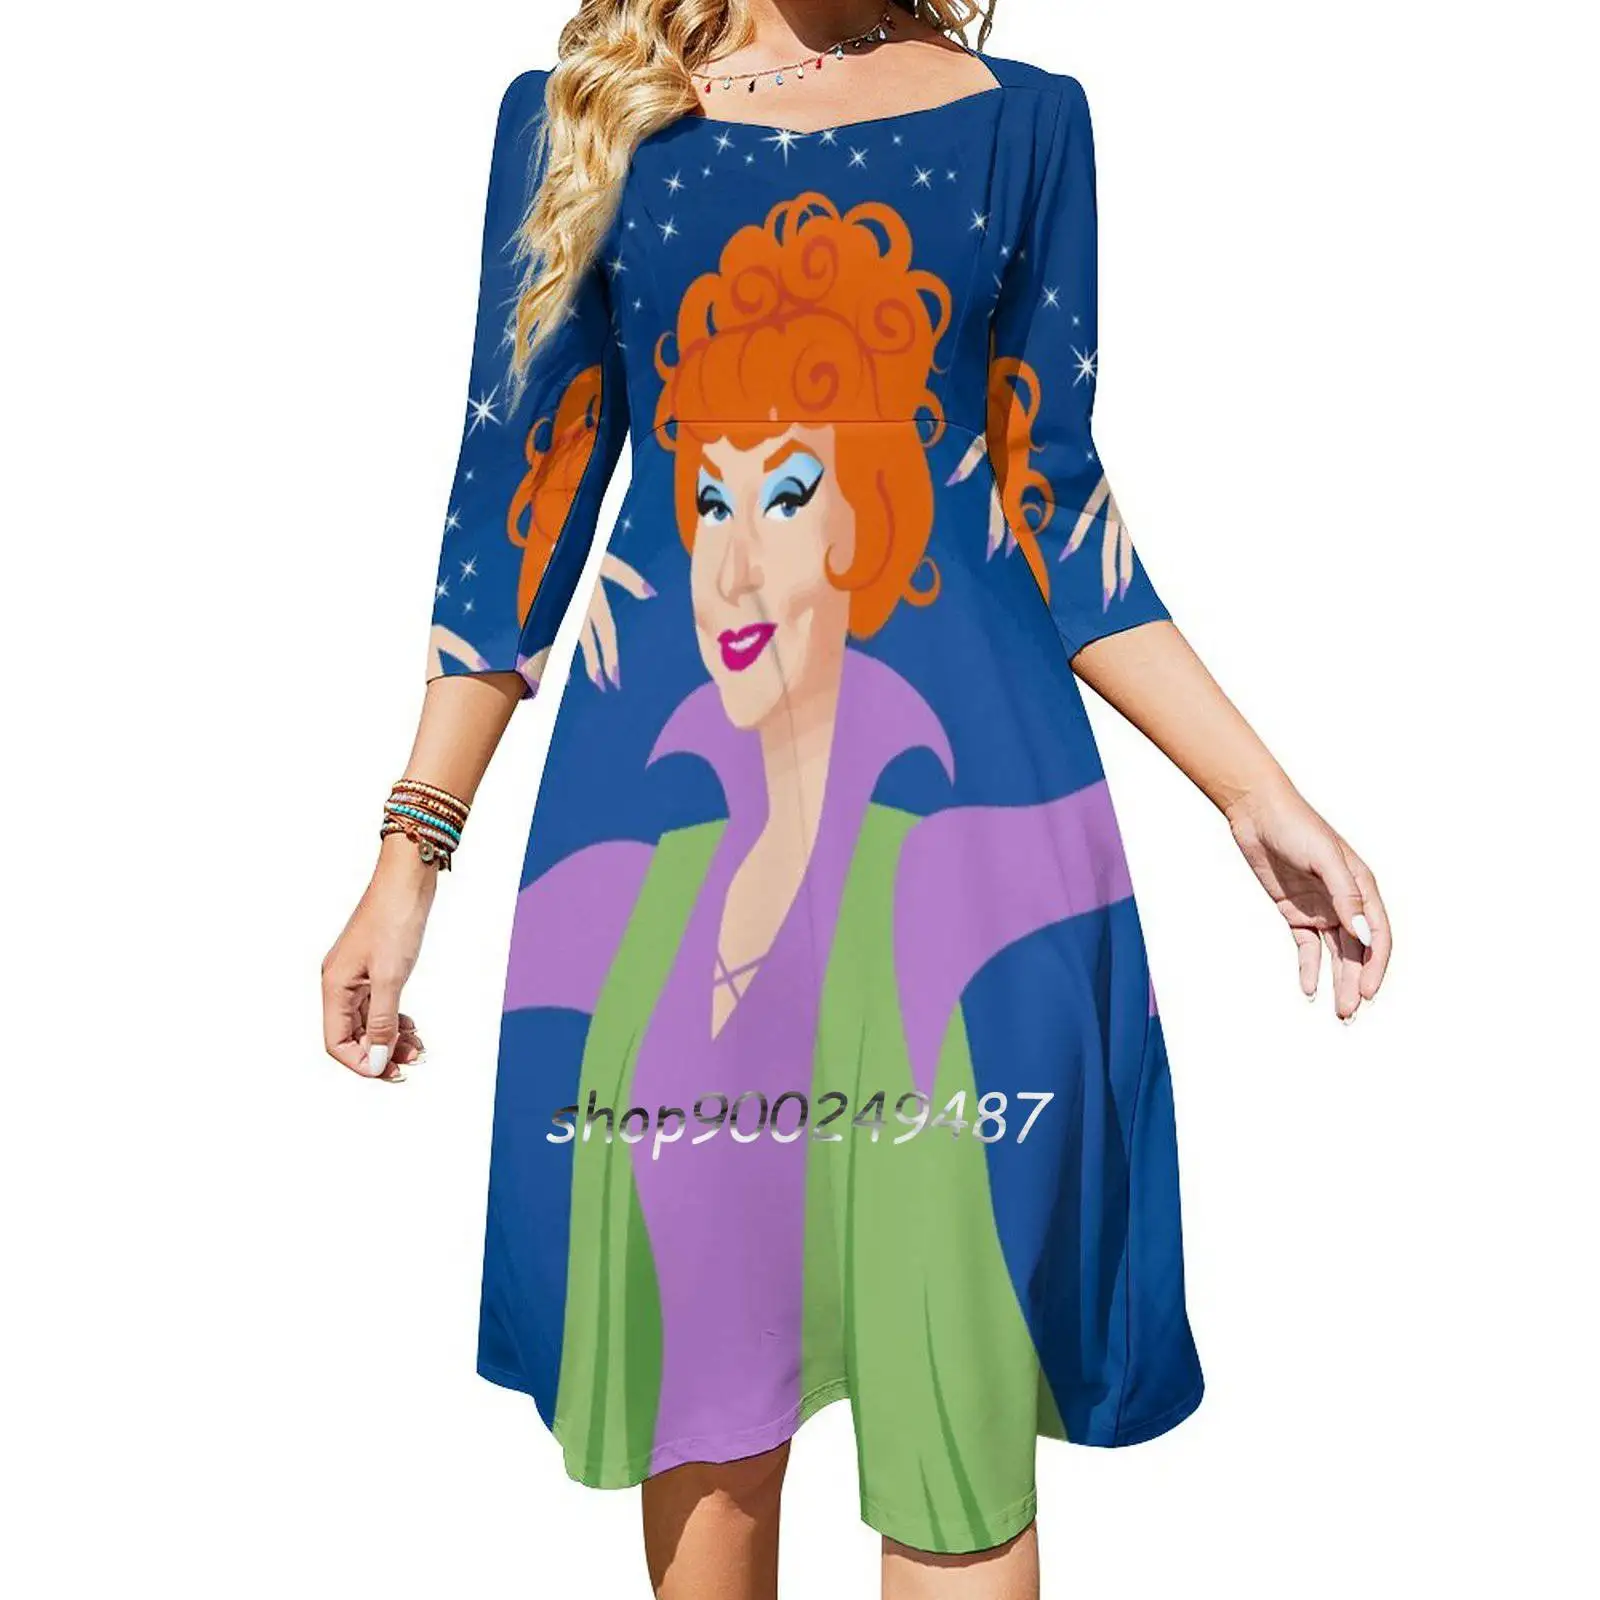 Endora Long Sleeve Sexy Dresses For Women 2022 Ladies Vintage Elegant Party Dress Agnes Moorhead Endara Bewitched Tv Series images - 6